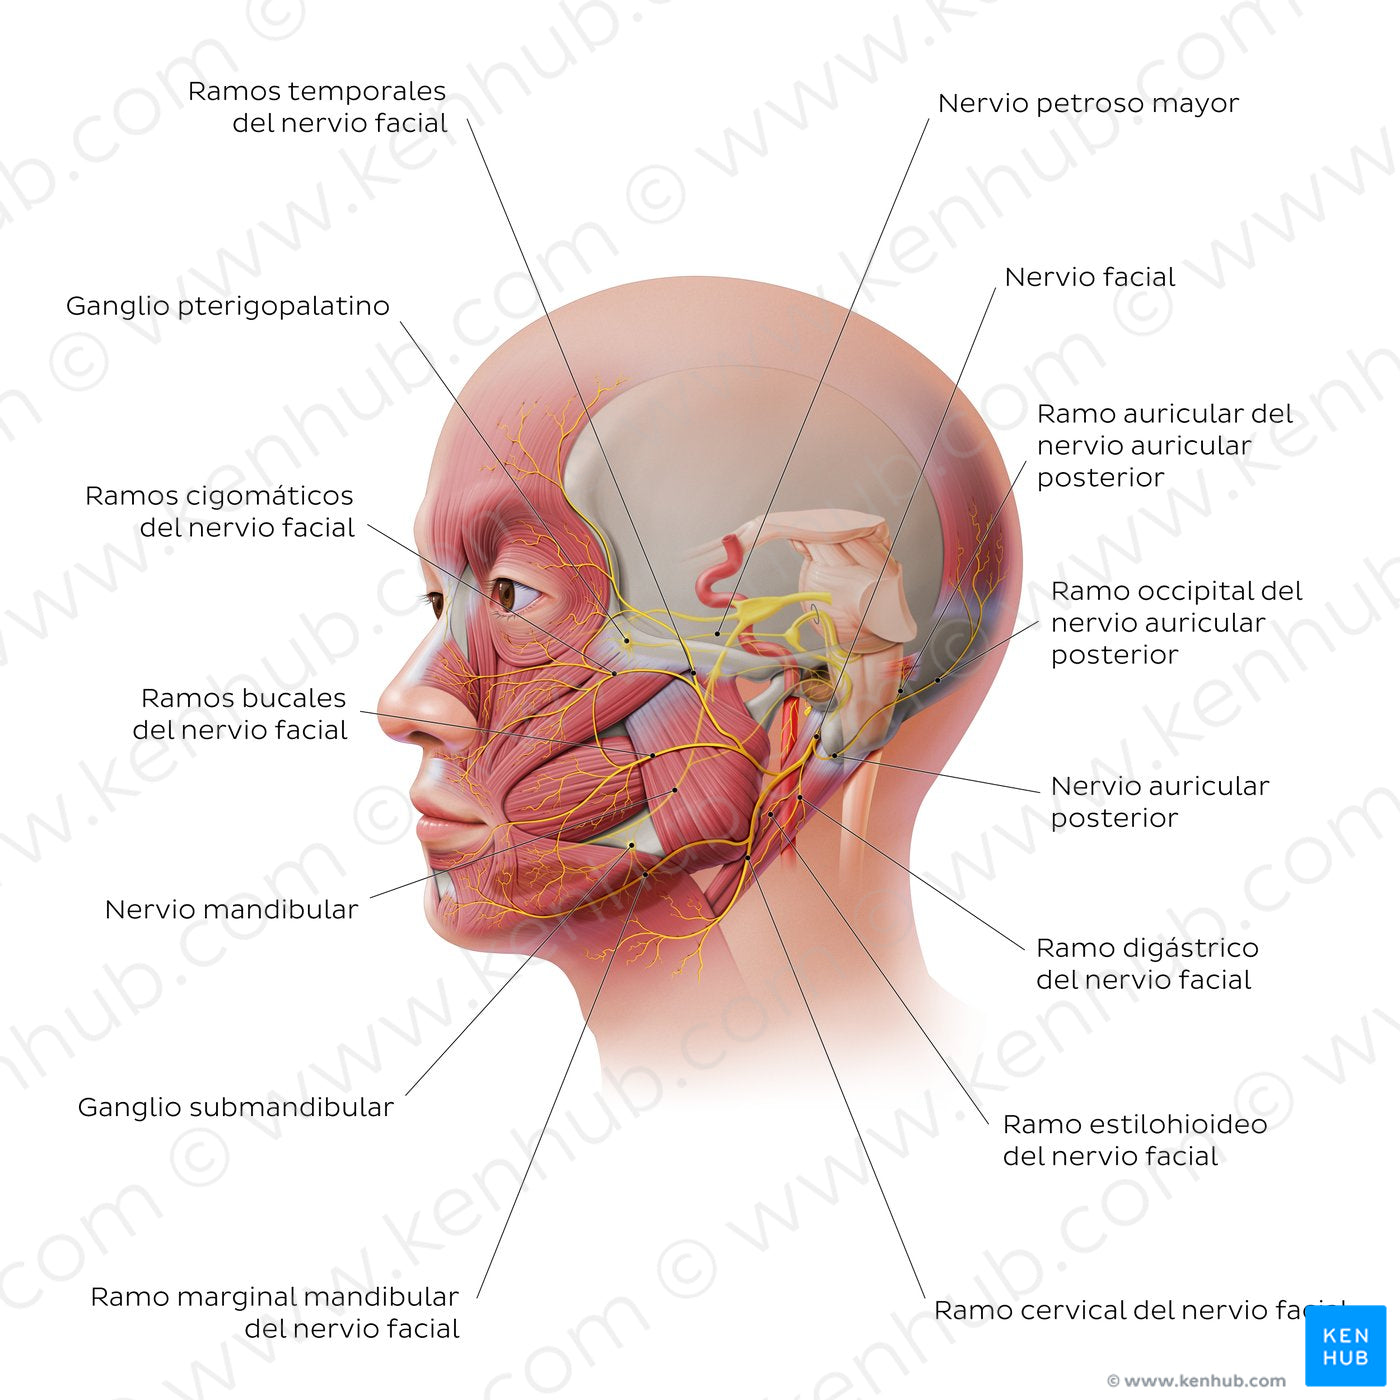 Facial nerve: extracranial branches (Spanish)